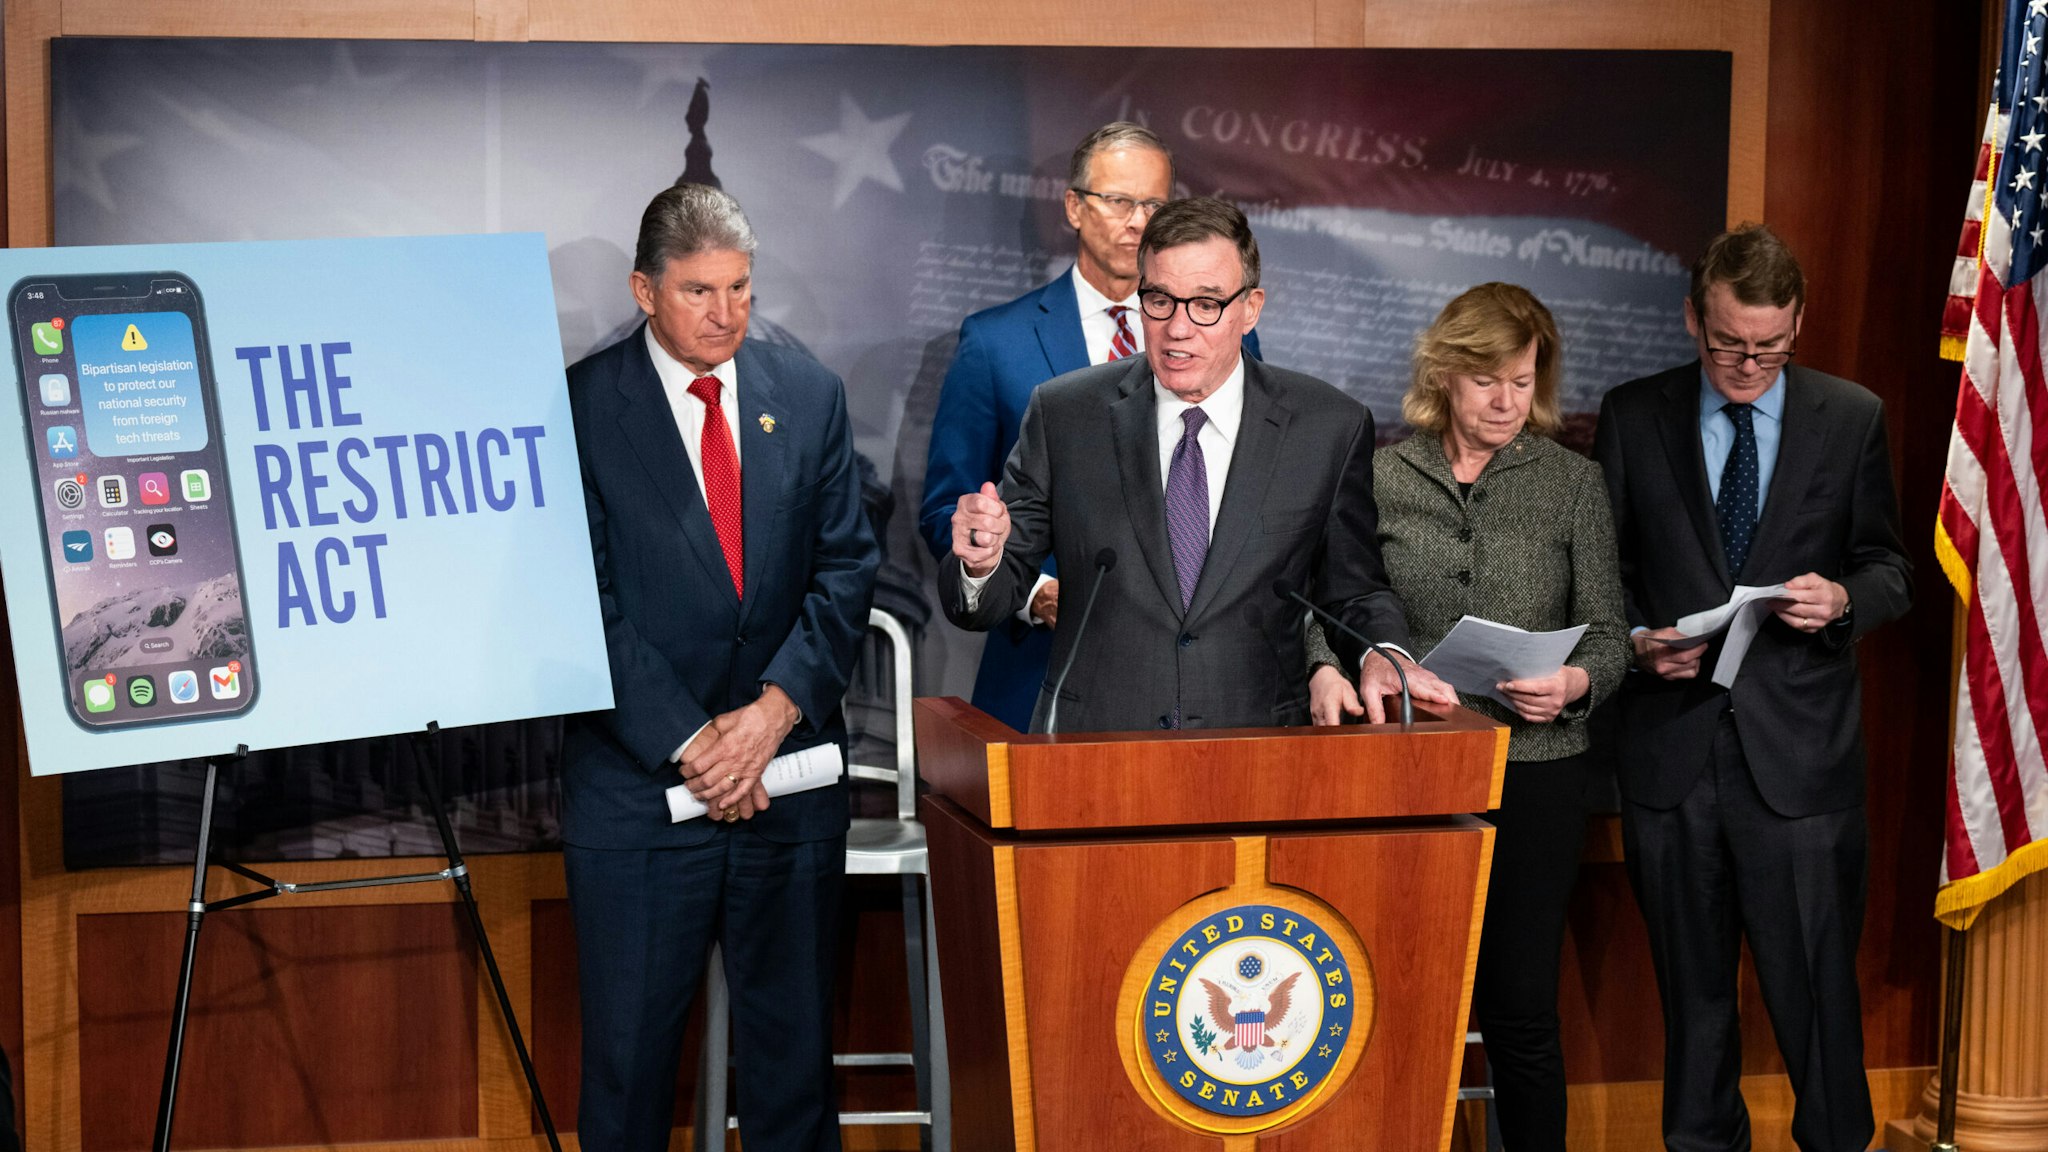 WASHINGTON - MARCH 7: Sen. Mark Warner, D-Va., speaks during the news conference to introduce the Restricting the Emergence of Security Threats that Risk Information Communications Technology Act, or RESTRICT Act, in the Capitol on Tuesday, March 7, 2023. . Warner is flanked from left by Sen. Joe Manchin, D-W. Va., Sen. John Thune, R-S. Dak., Sen. Tammy Baldwin, D-Wisc., and Sen. Michael Bennet, D-Colo.